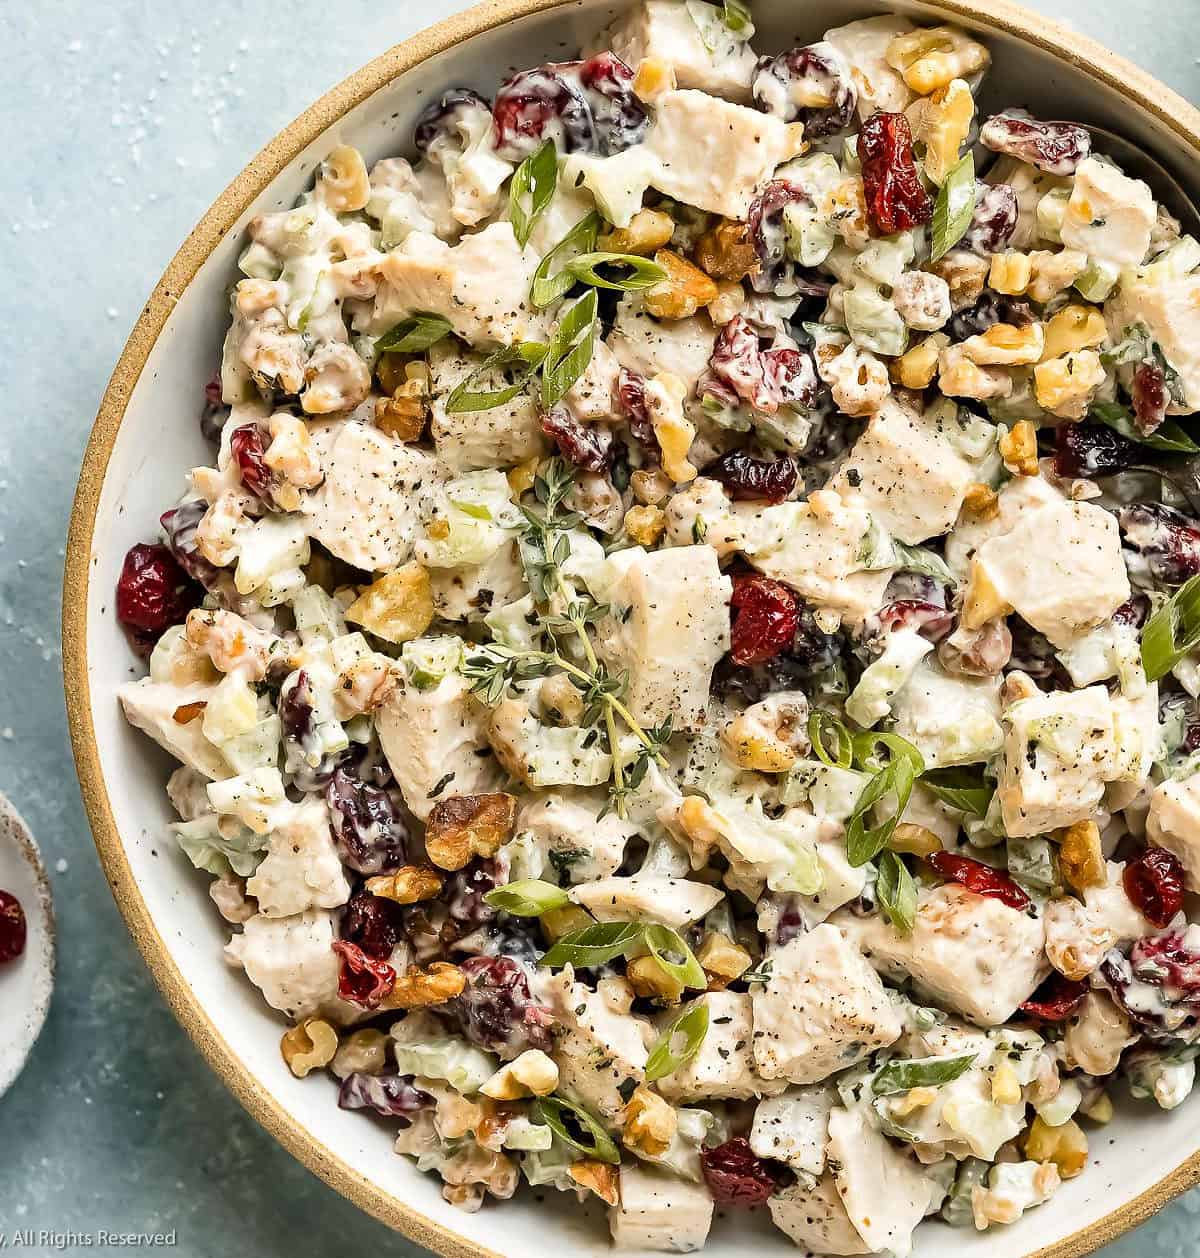  Packed with flavor from the juicy cranberries and tender chicken